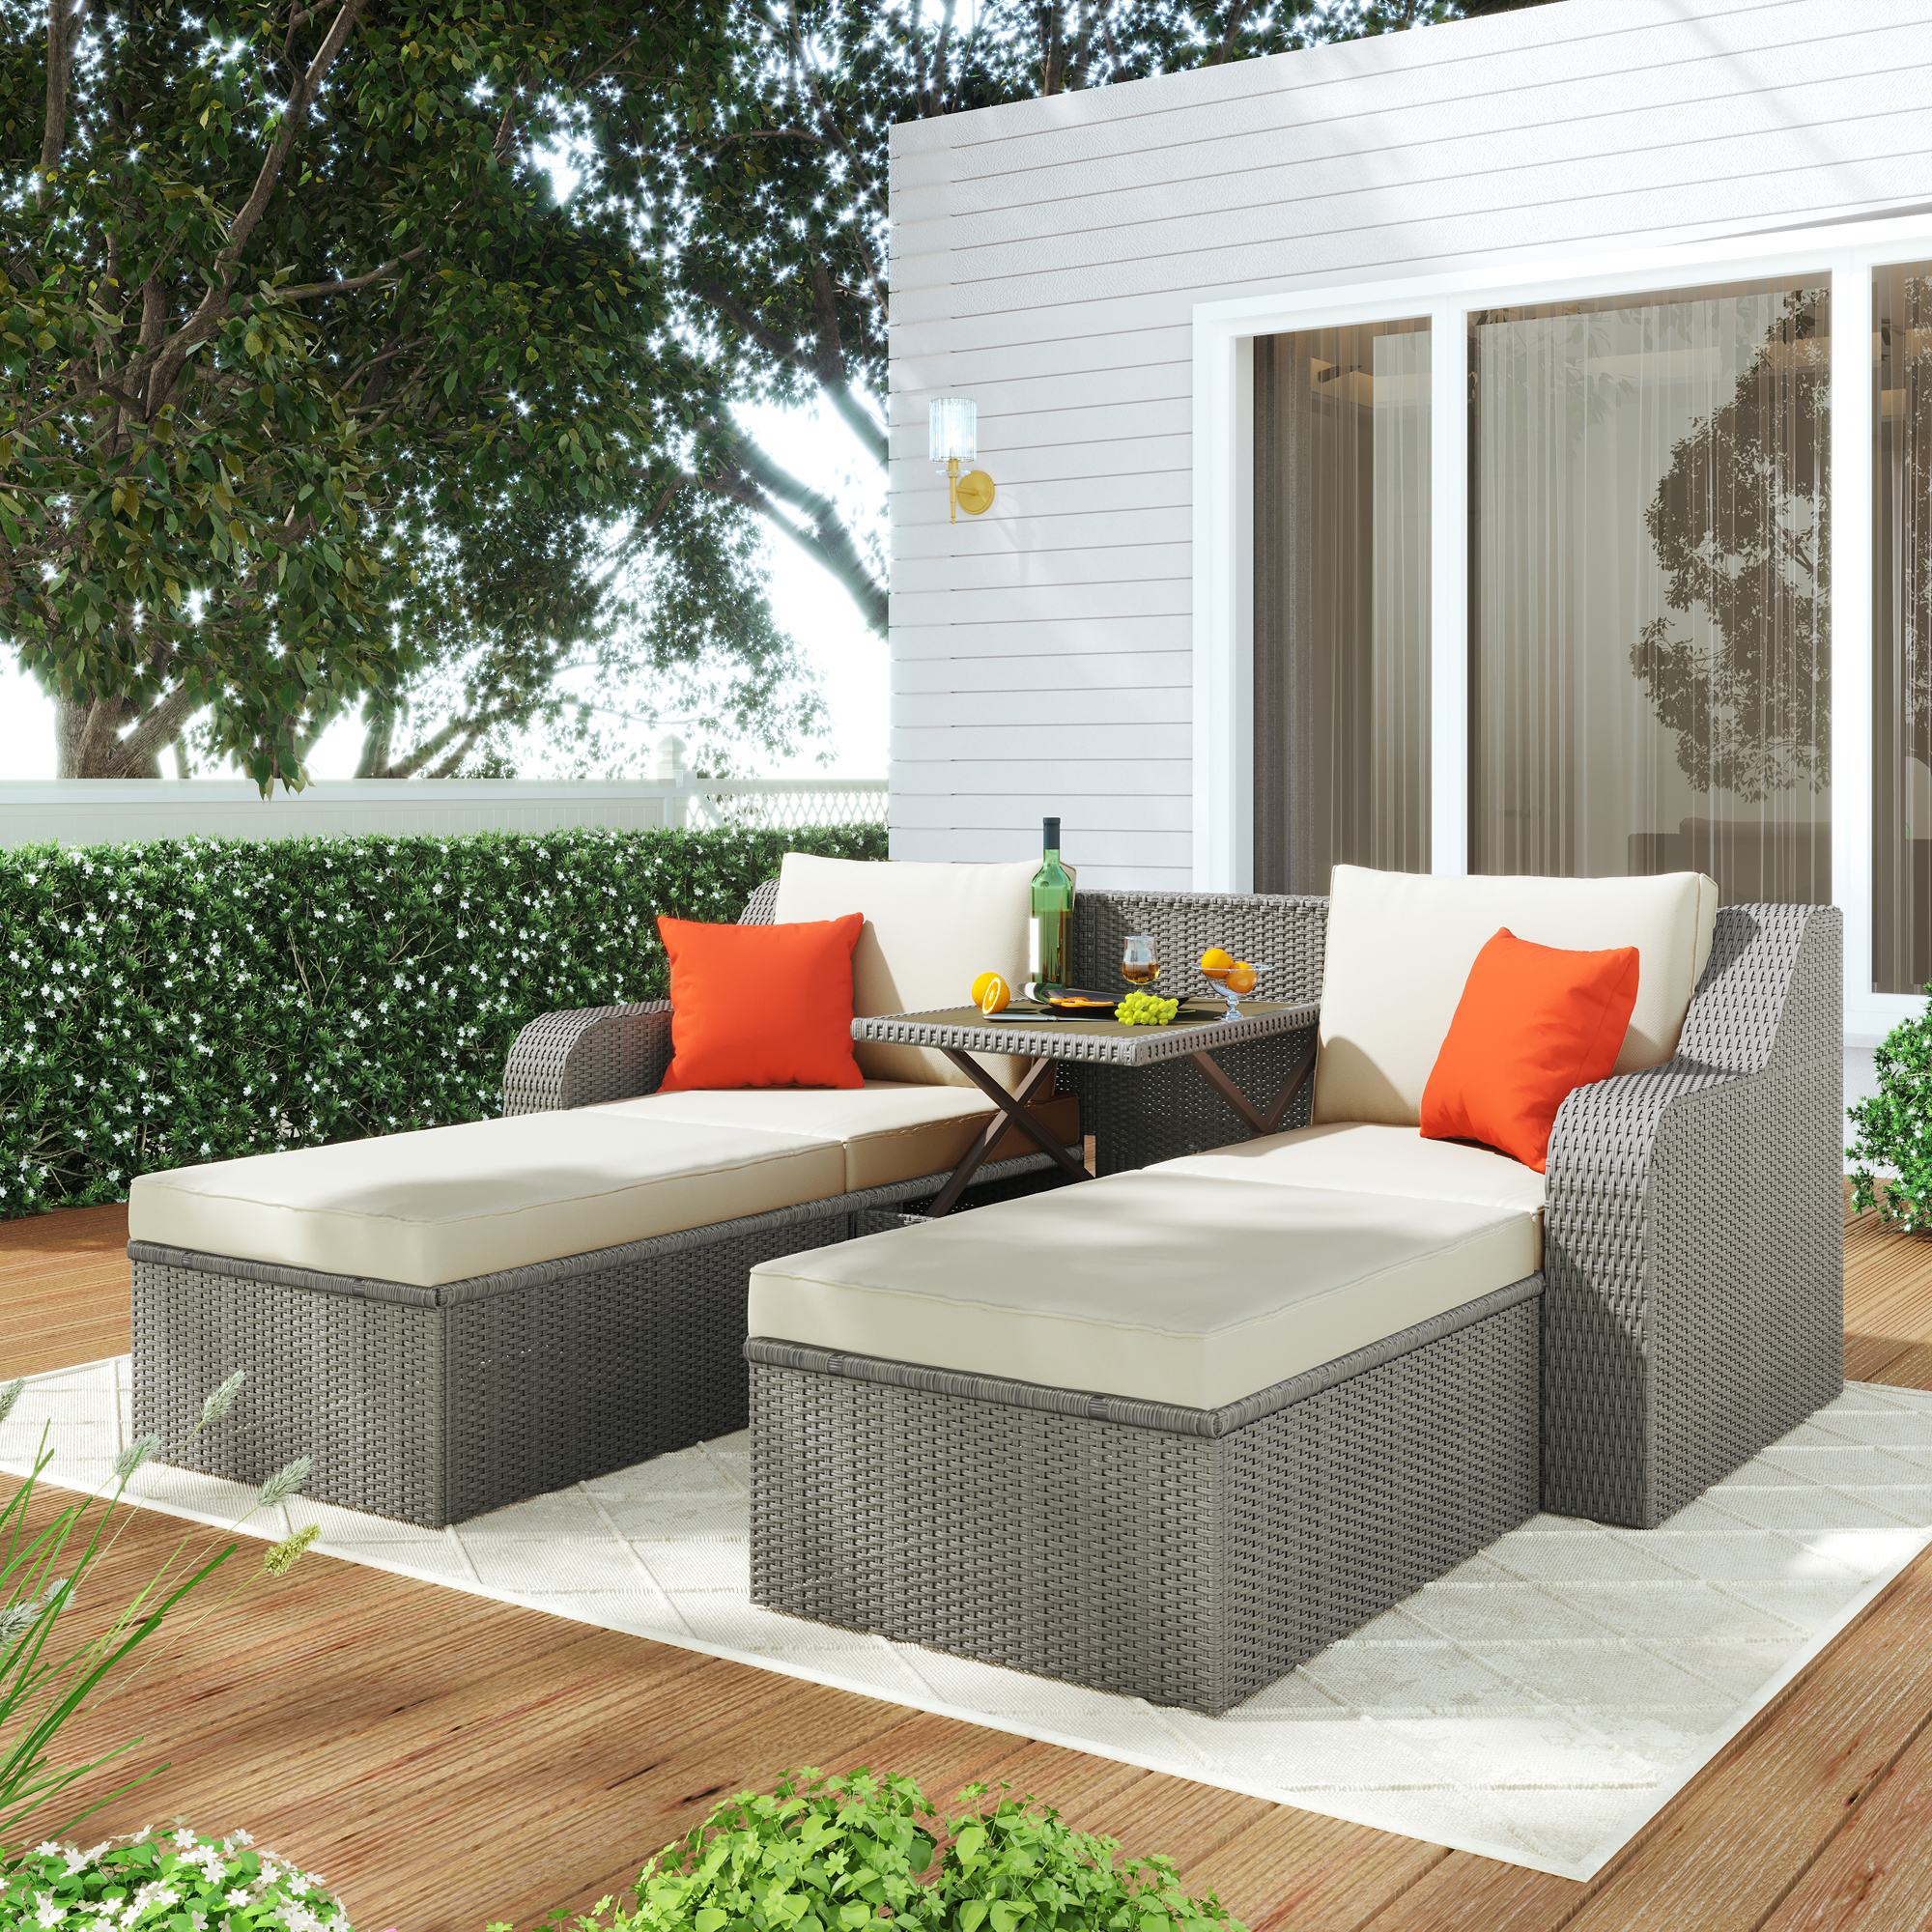 Gray Wicker Patio Seating Sets, SESSLIFE 3-Piece Outdoor Sectional Sofa Set with Loveseat and Soft Cushions, All-Weather Outdoor Table and Chairs Set - image 1 of 9